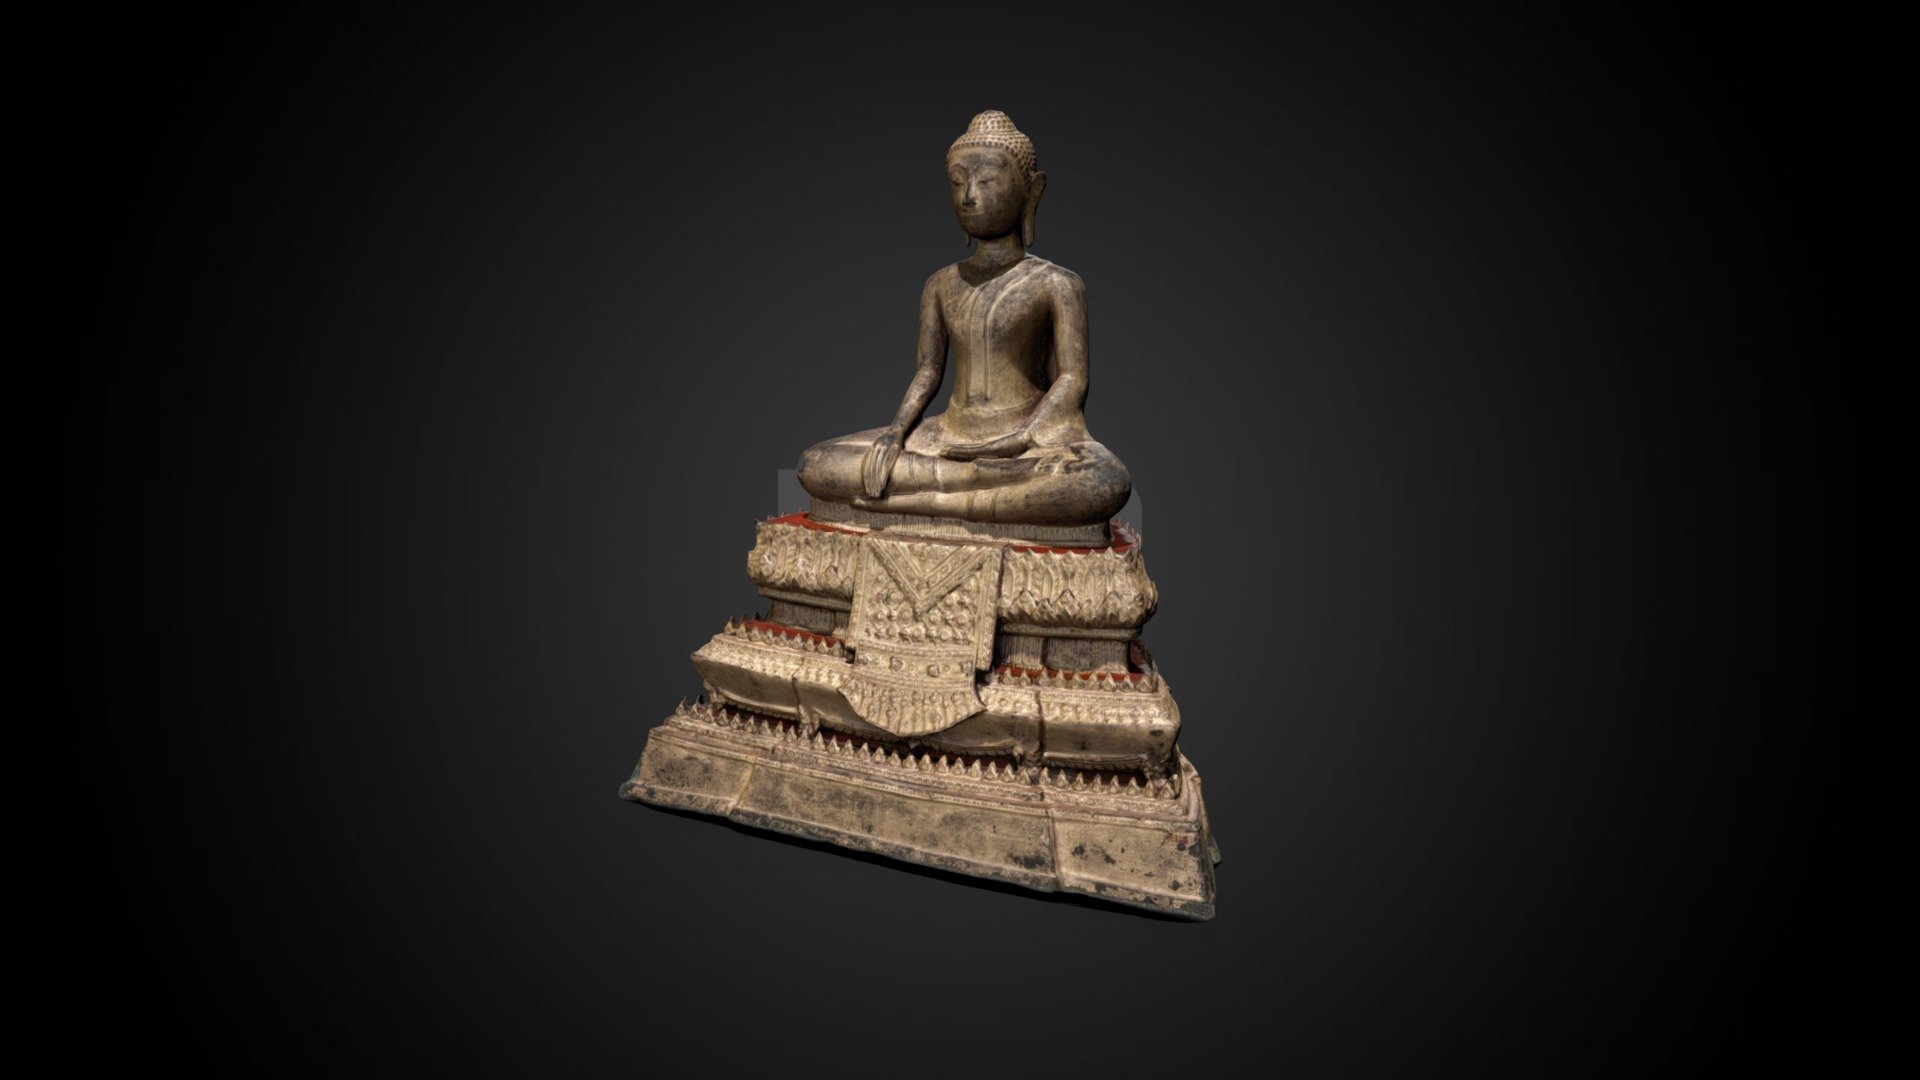 Gilt bronze Seated Buddha, now in the collection of the Minneapolis Institute of Art.

More information at

https://collections.artsmia.org/art/12487/seated-buddha-siam - Seated Buddha, date unknown - Download Free 3D model by Minneapolis Institute of Art (@artsmia) 3d model